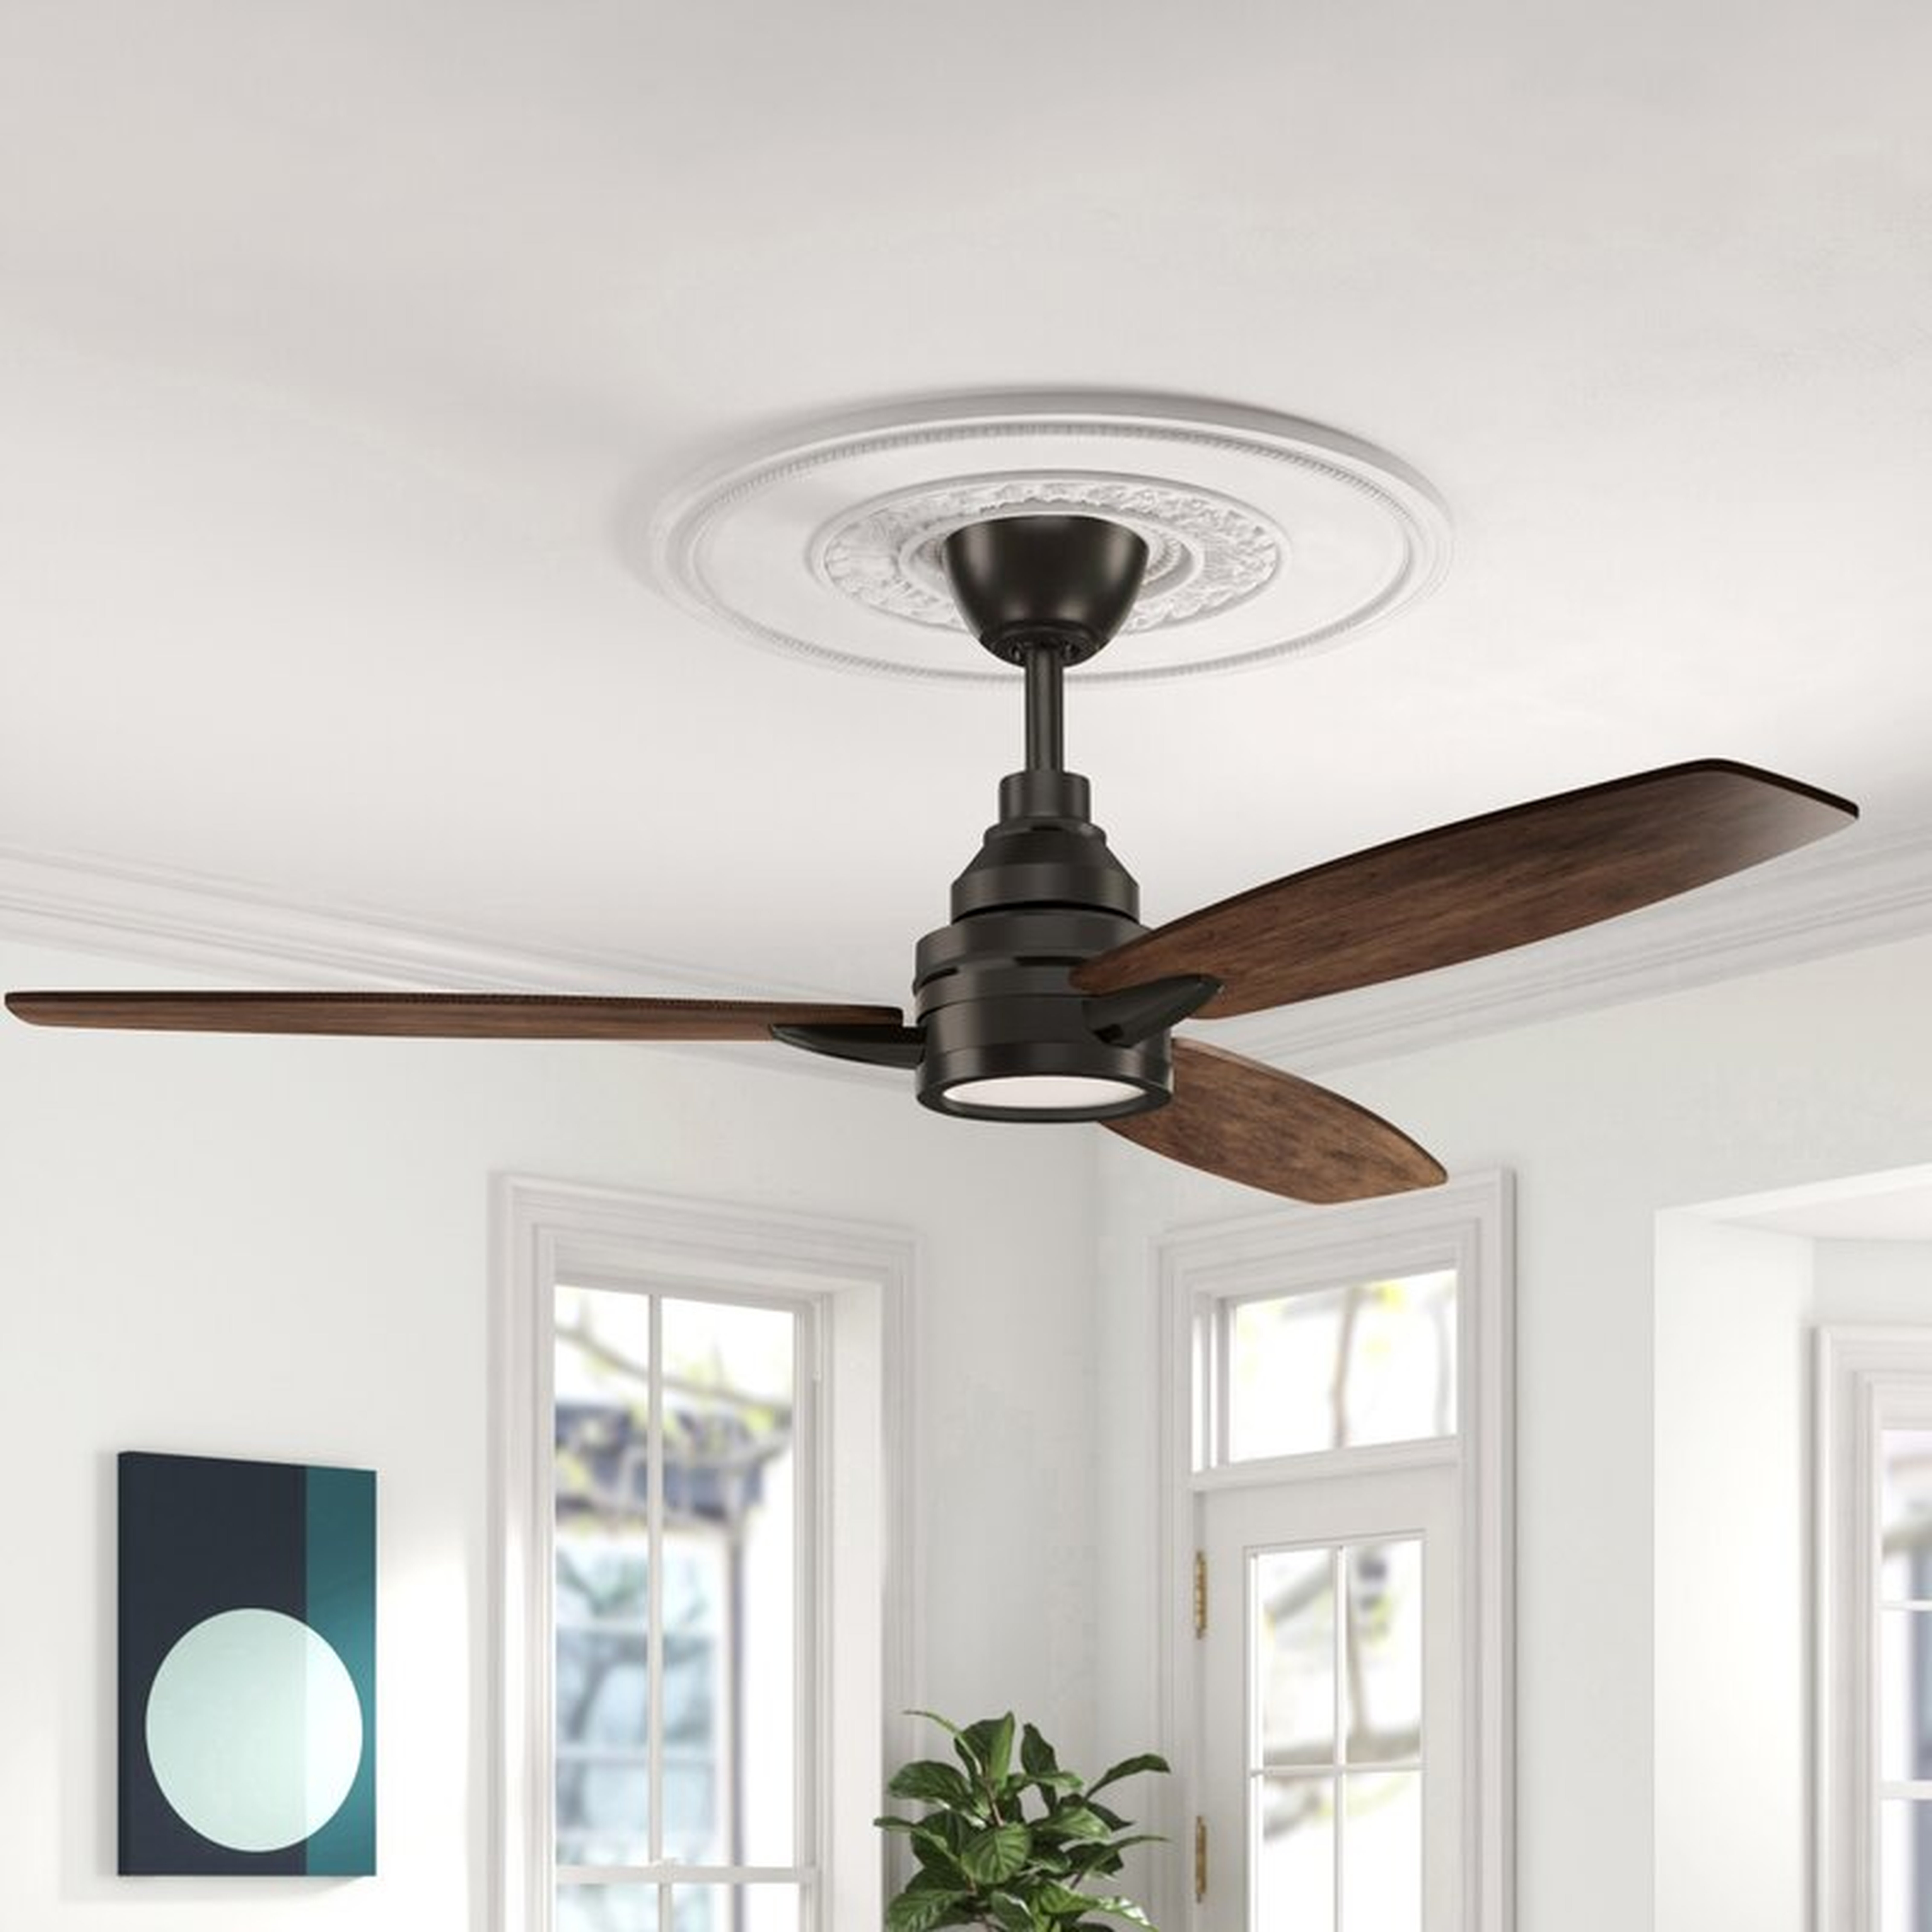 60" Kovach 3 - Blade LED Standard Ceiling Fan with Remote Control and Light Kit Included - Birch Lane